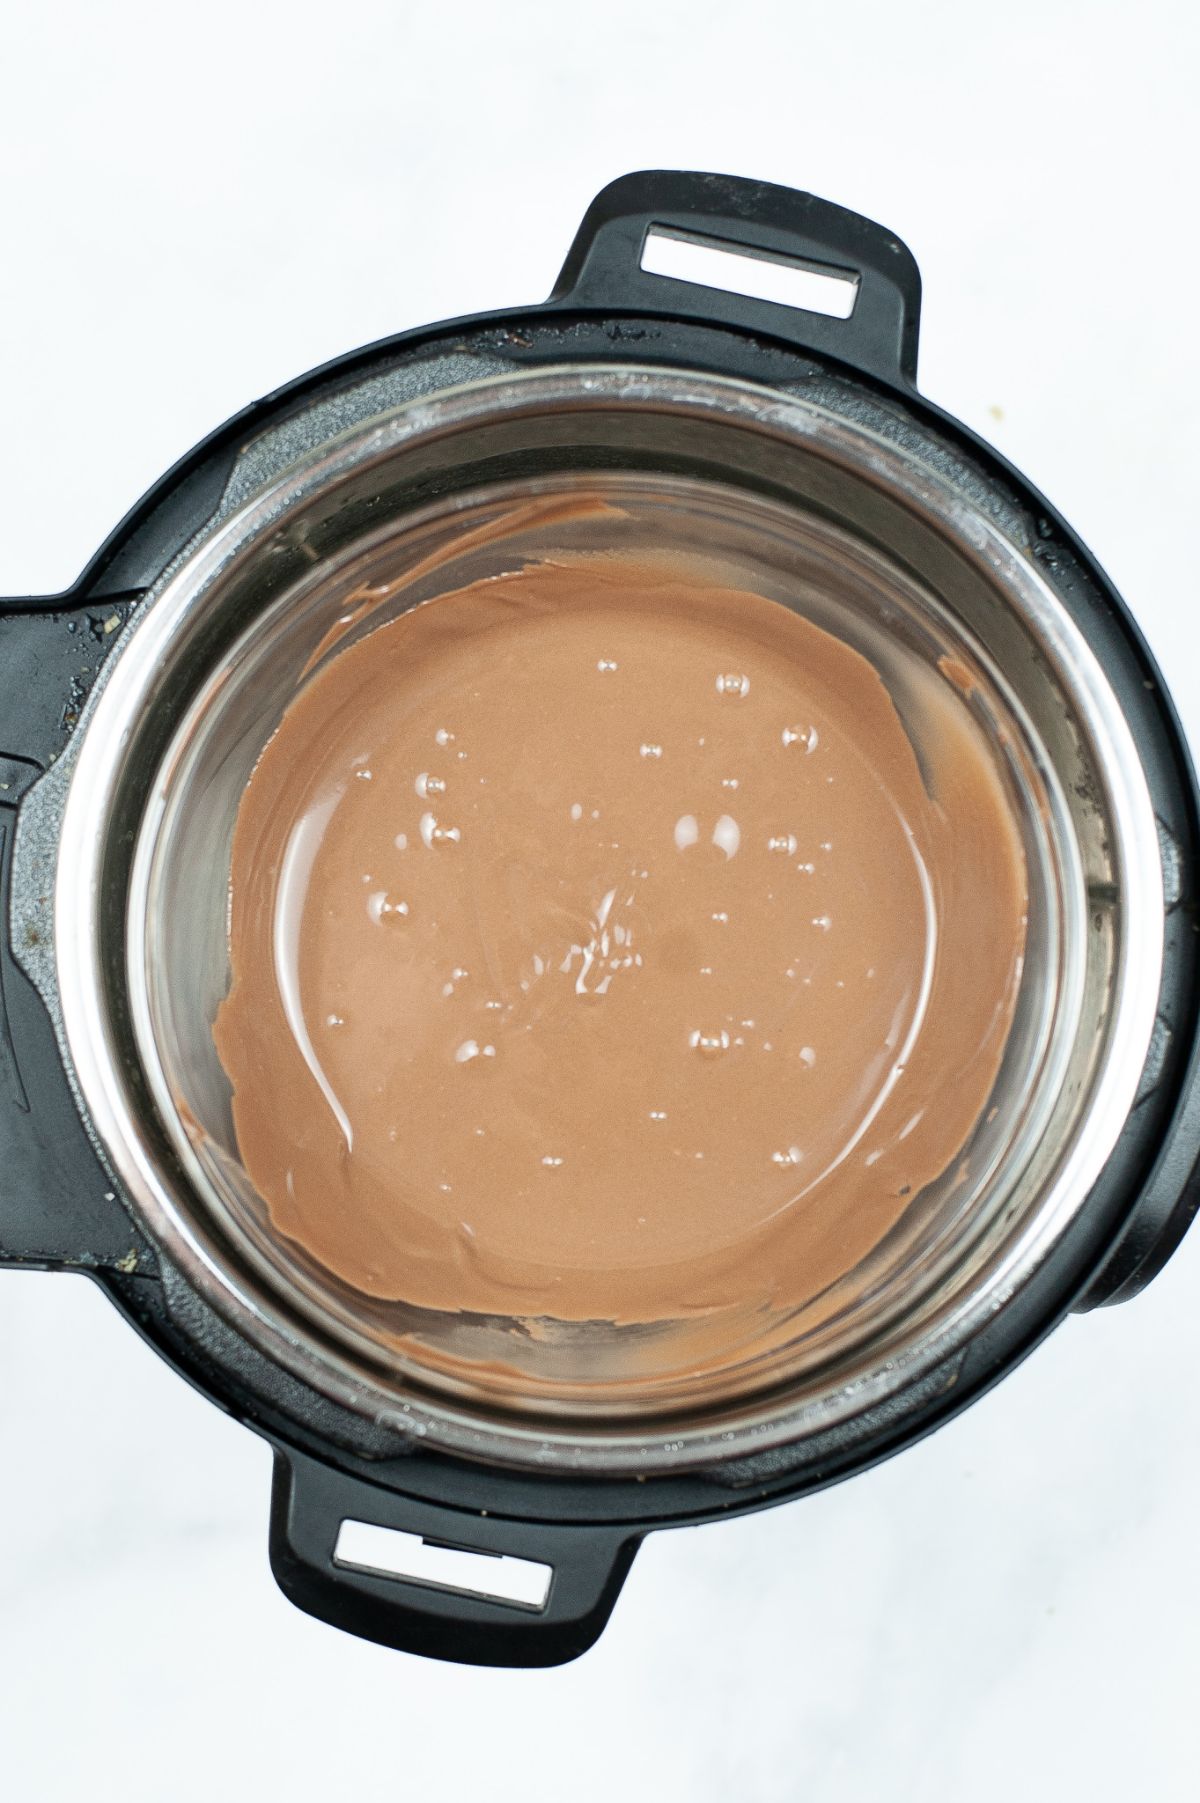 Melted chocolate candy melts in the instant pot.